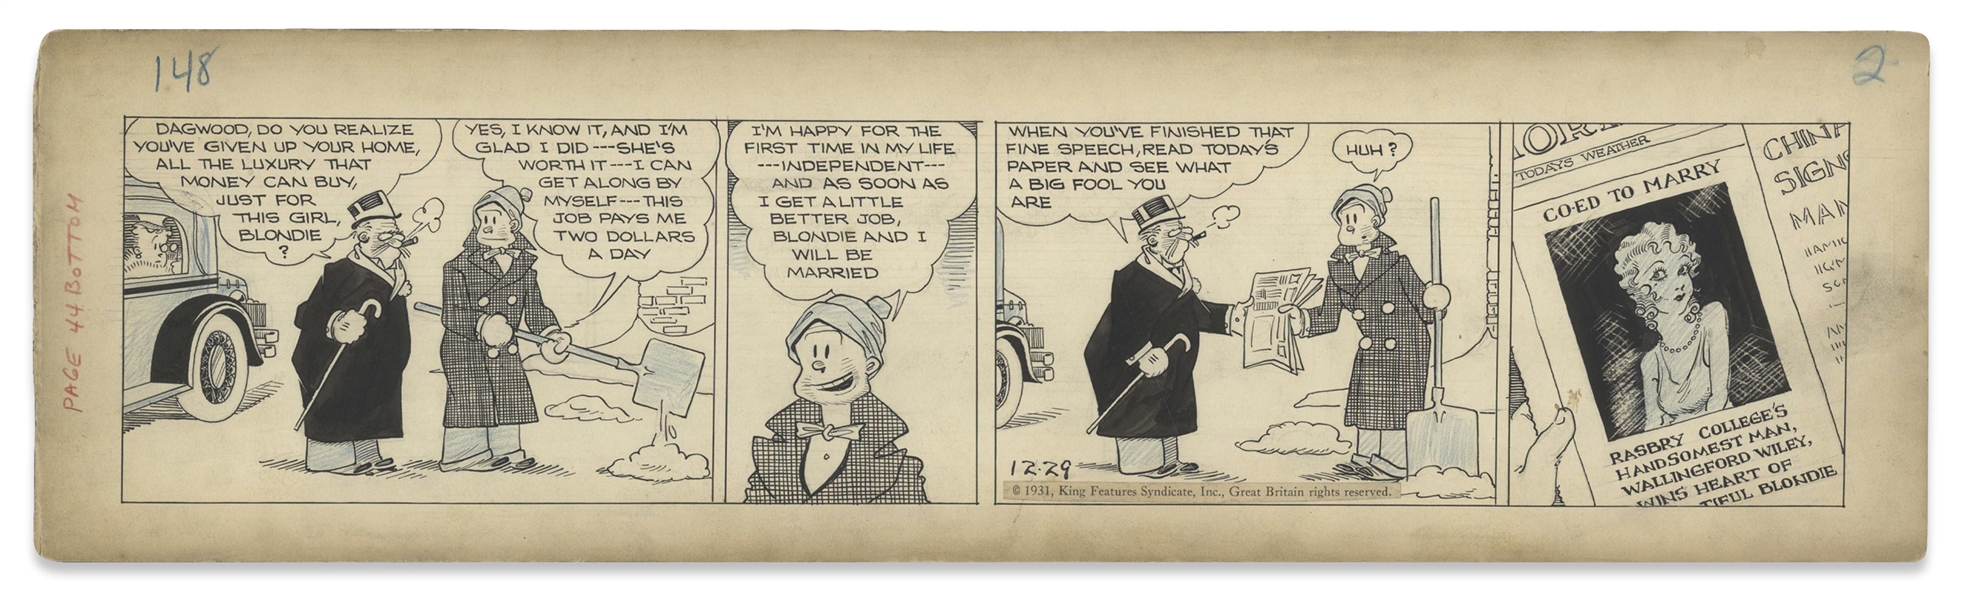 Chic Young Hand-Drawn ''Blondie'' Comic Strip From 1931 Titled ''The Big News!'' -- Dagwood Is Crushed With a Wedding Announcement for Blondie & Another Man